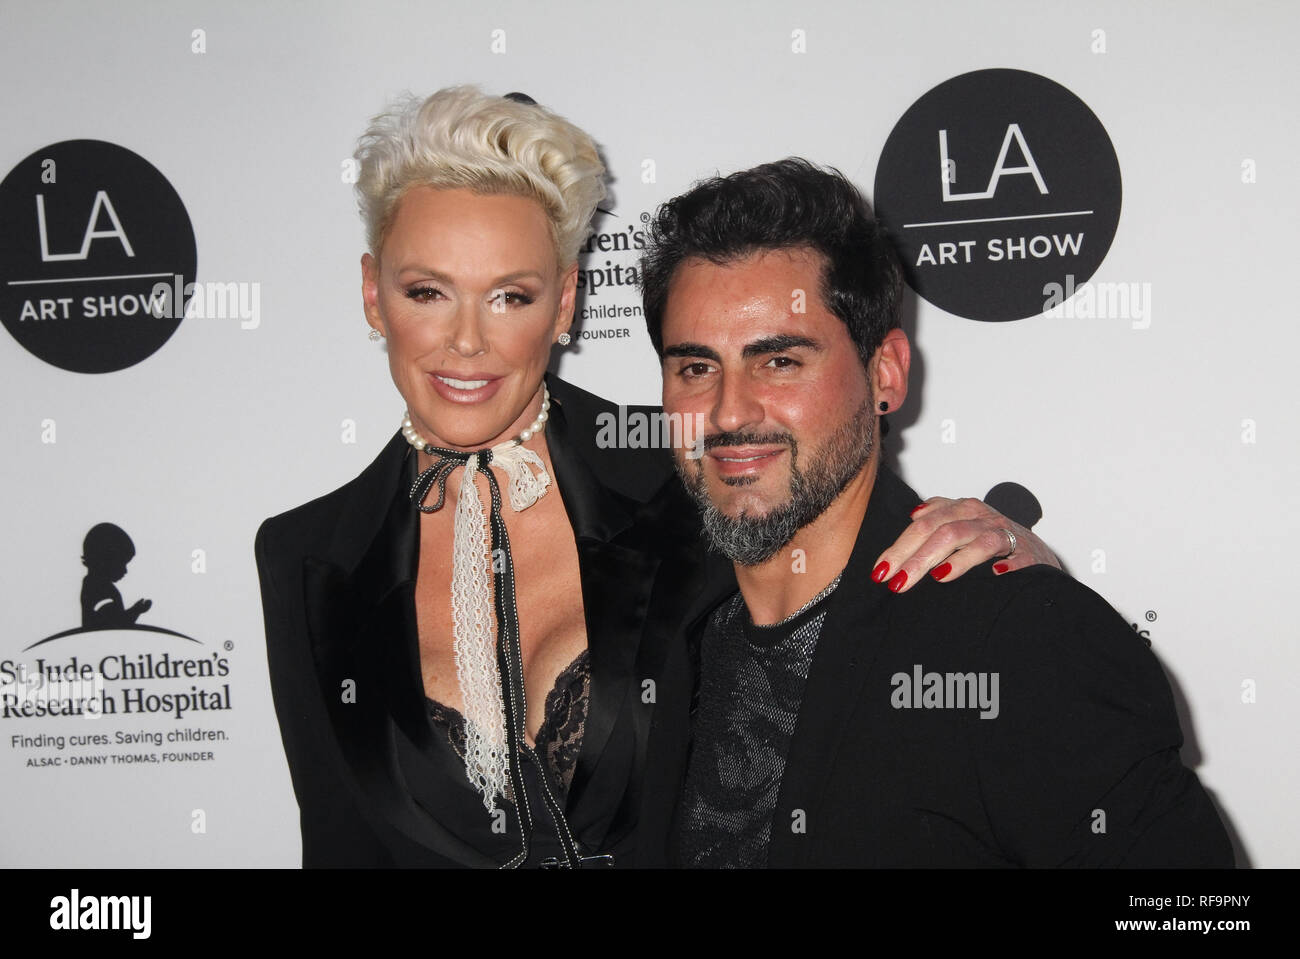 Brigitte Nielsen, Mattia Dessi  01/23/2019 The LA Art Show 2019 held at the Los Angeles Convention Center West Hall in Los Angeles, CA Photo by Izumi Hasegawa / HNW / PictureLux Stock Photo